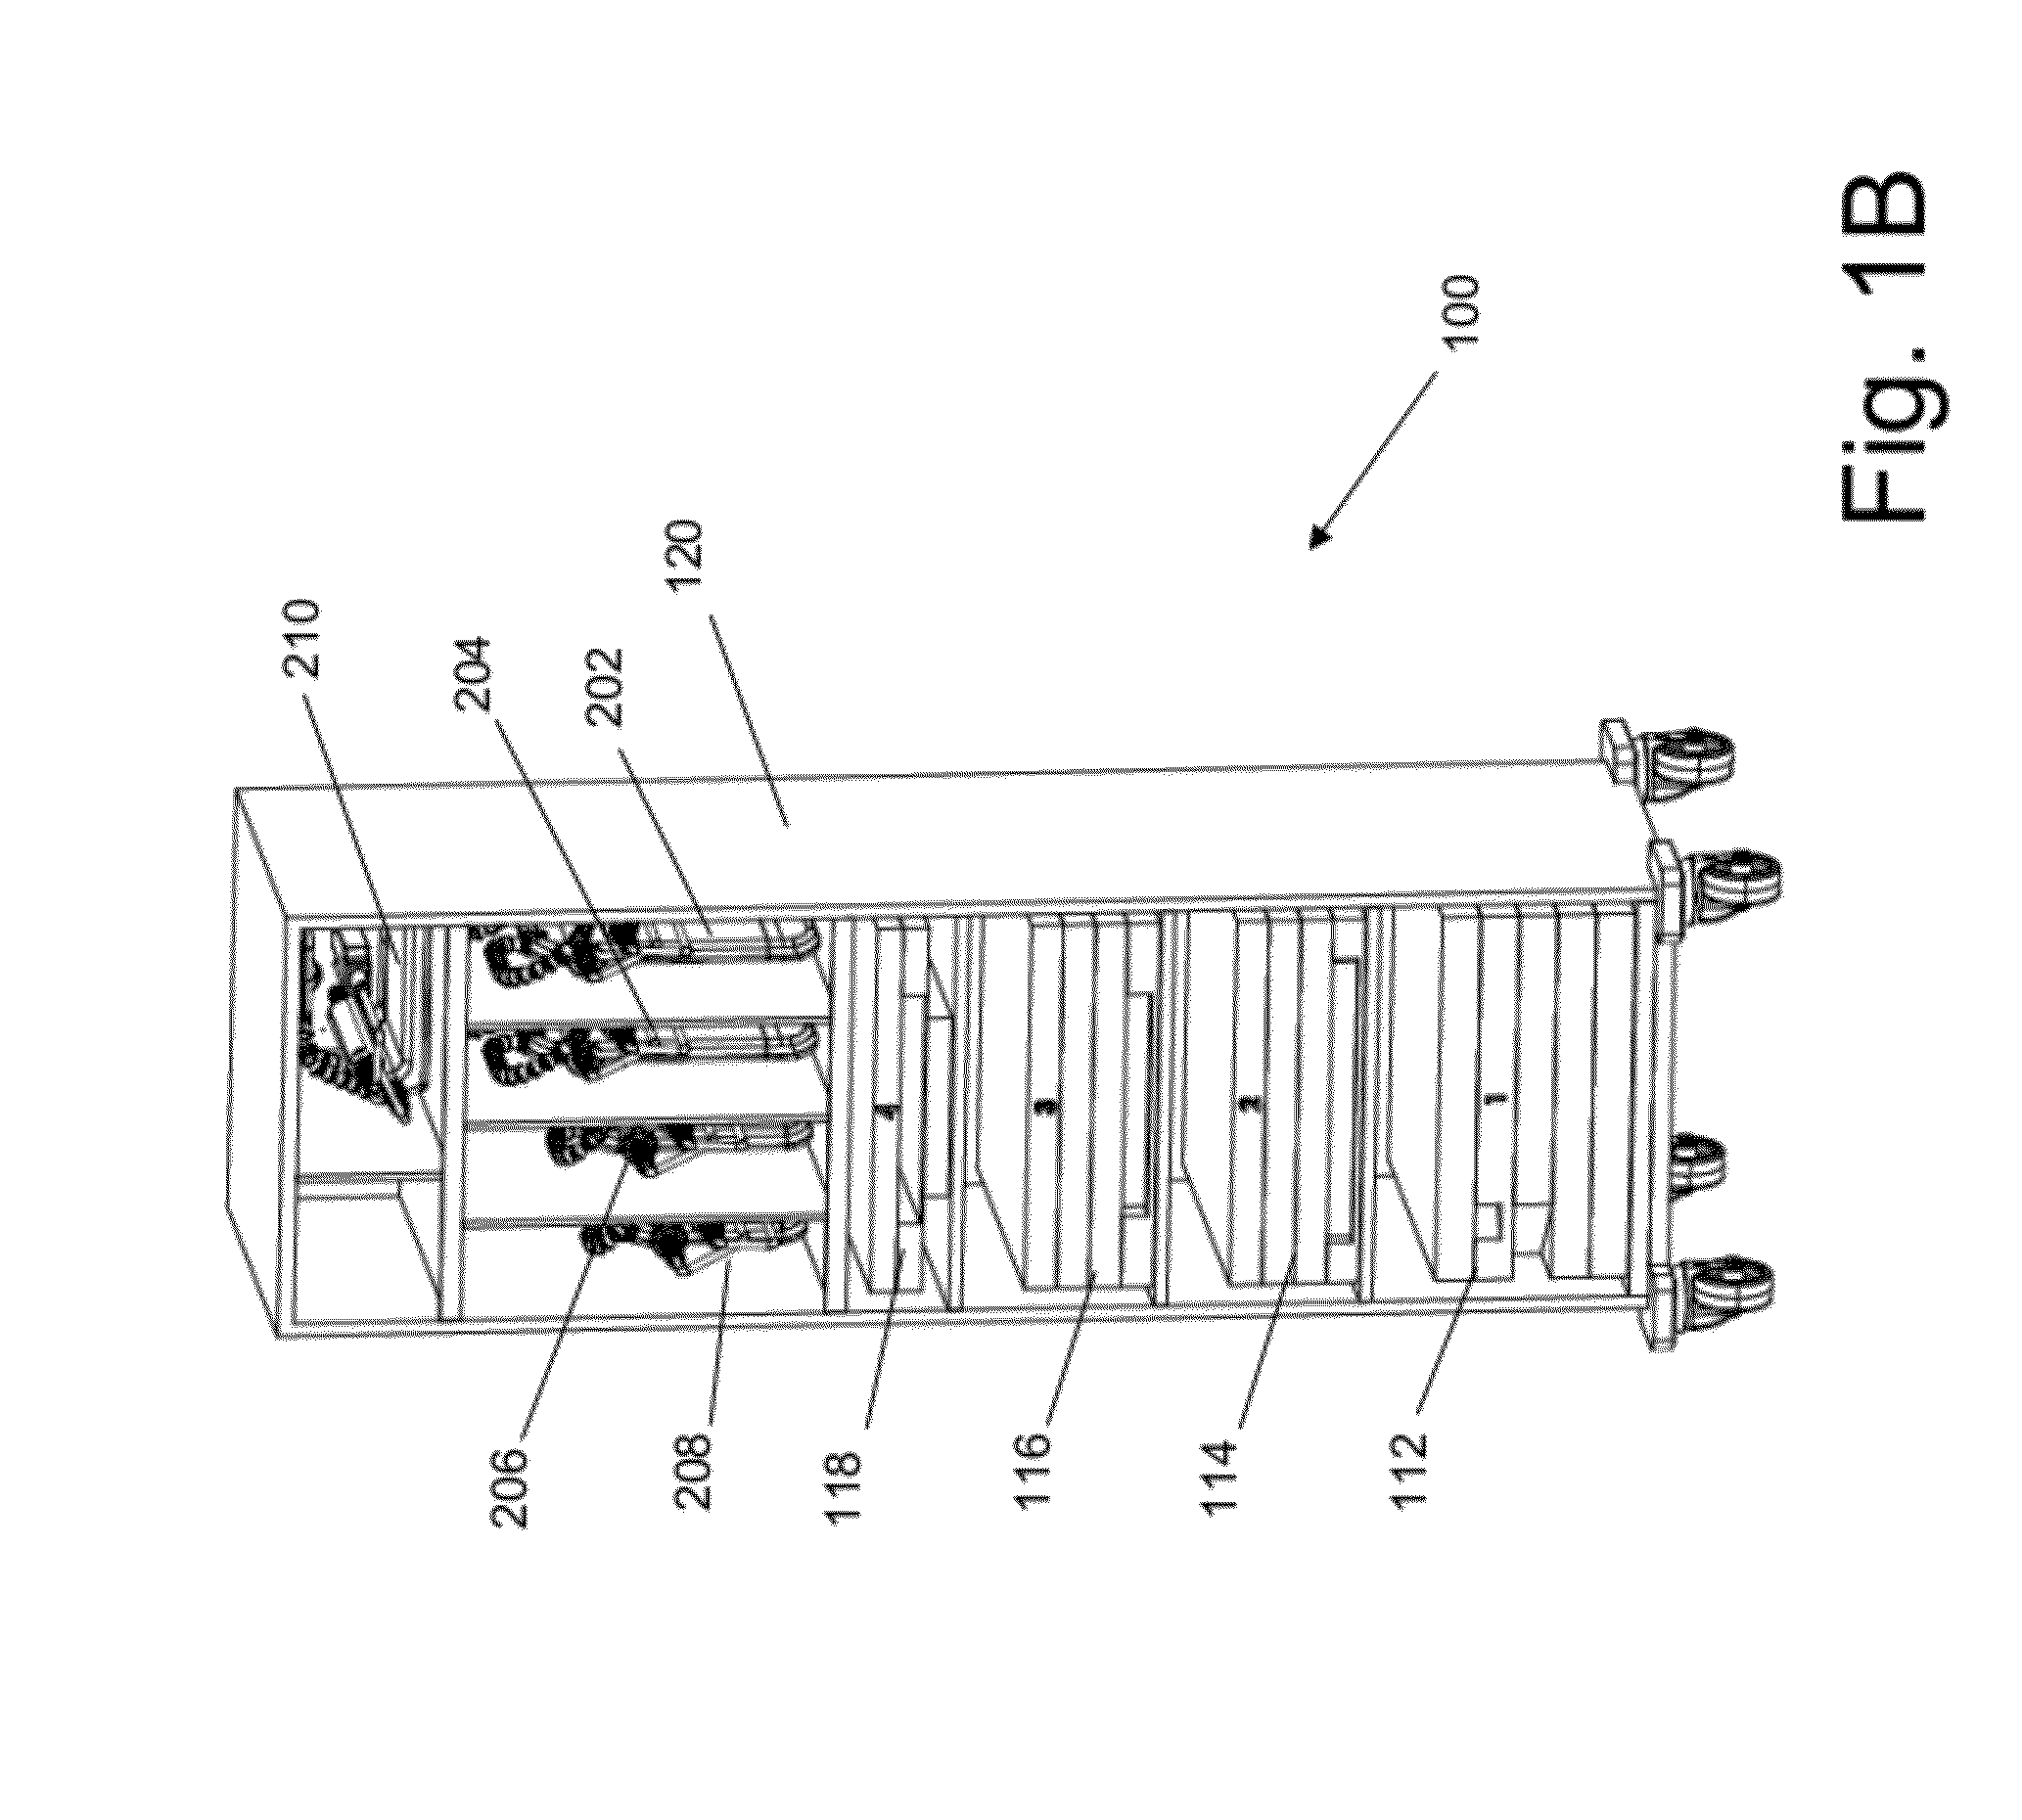 System of receive coils and pads for use with magnetic resonance imaging